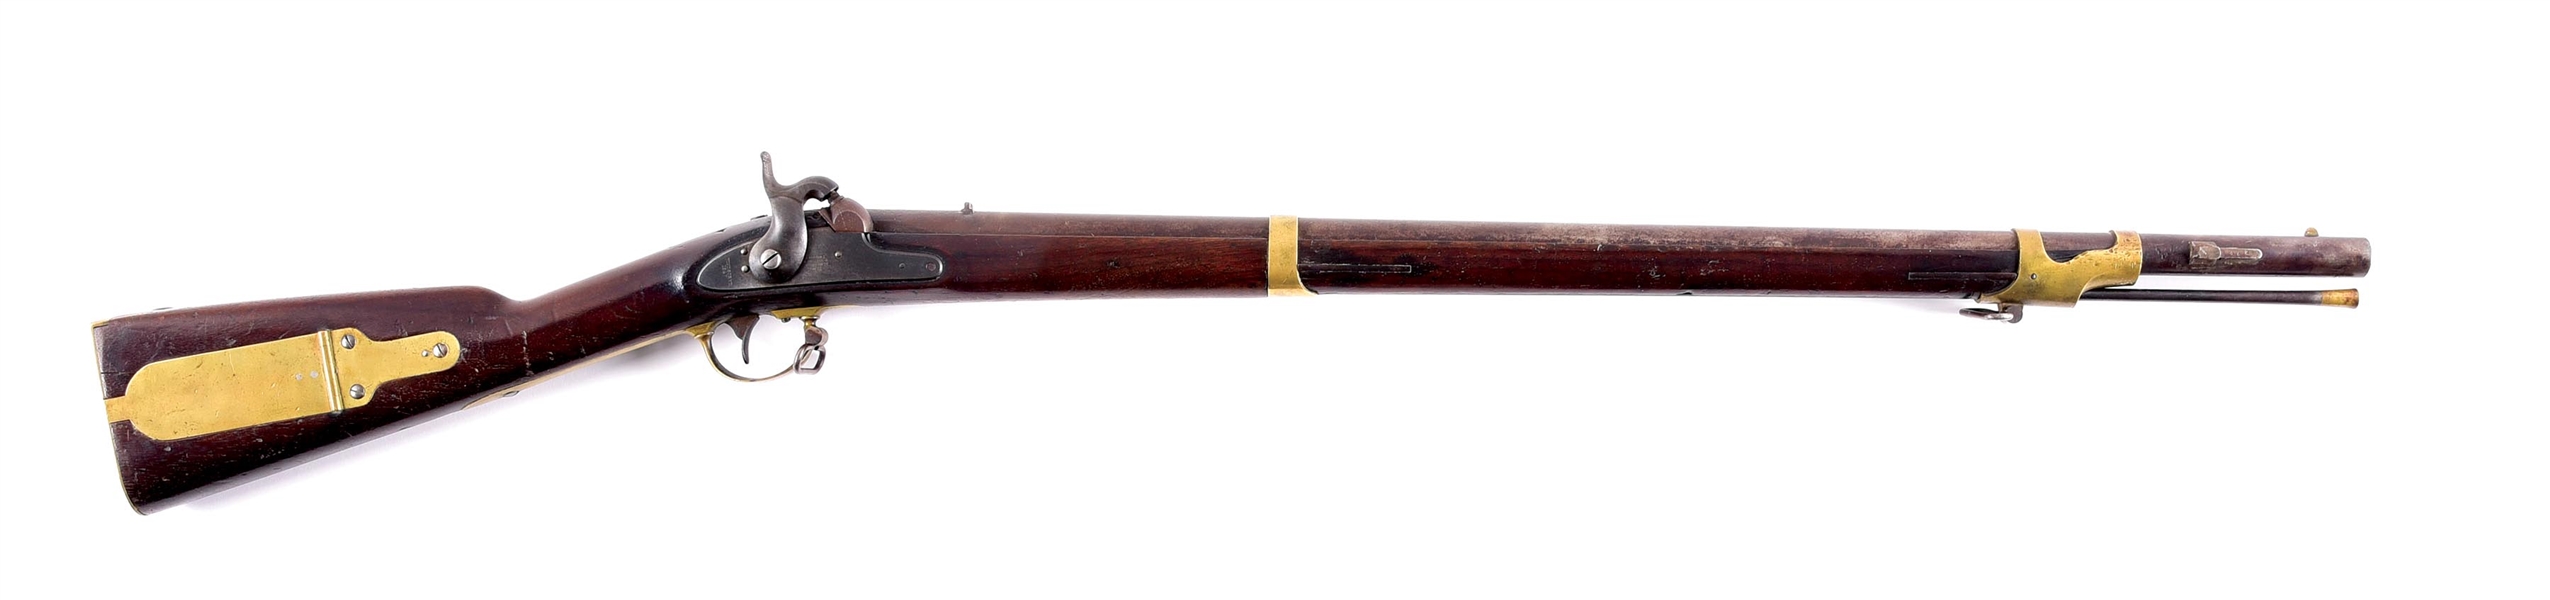 (A) ROBINS, KENDALL & LAWRENCE PERCUSSION MISSISSIPPI RIFLE, DATED 1847.